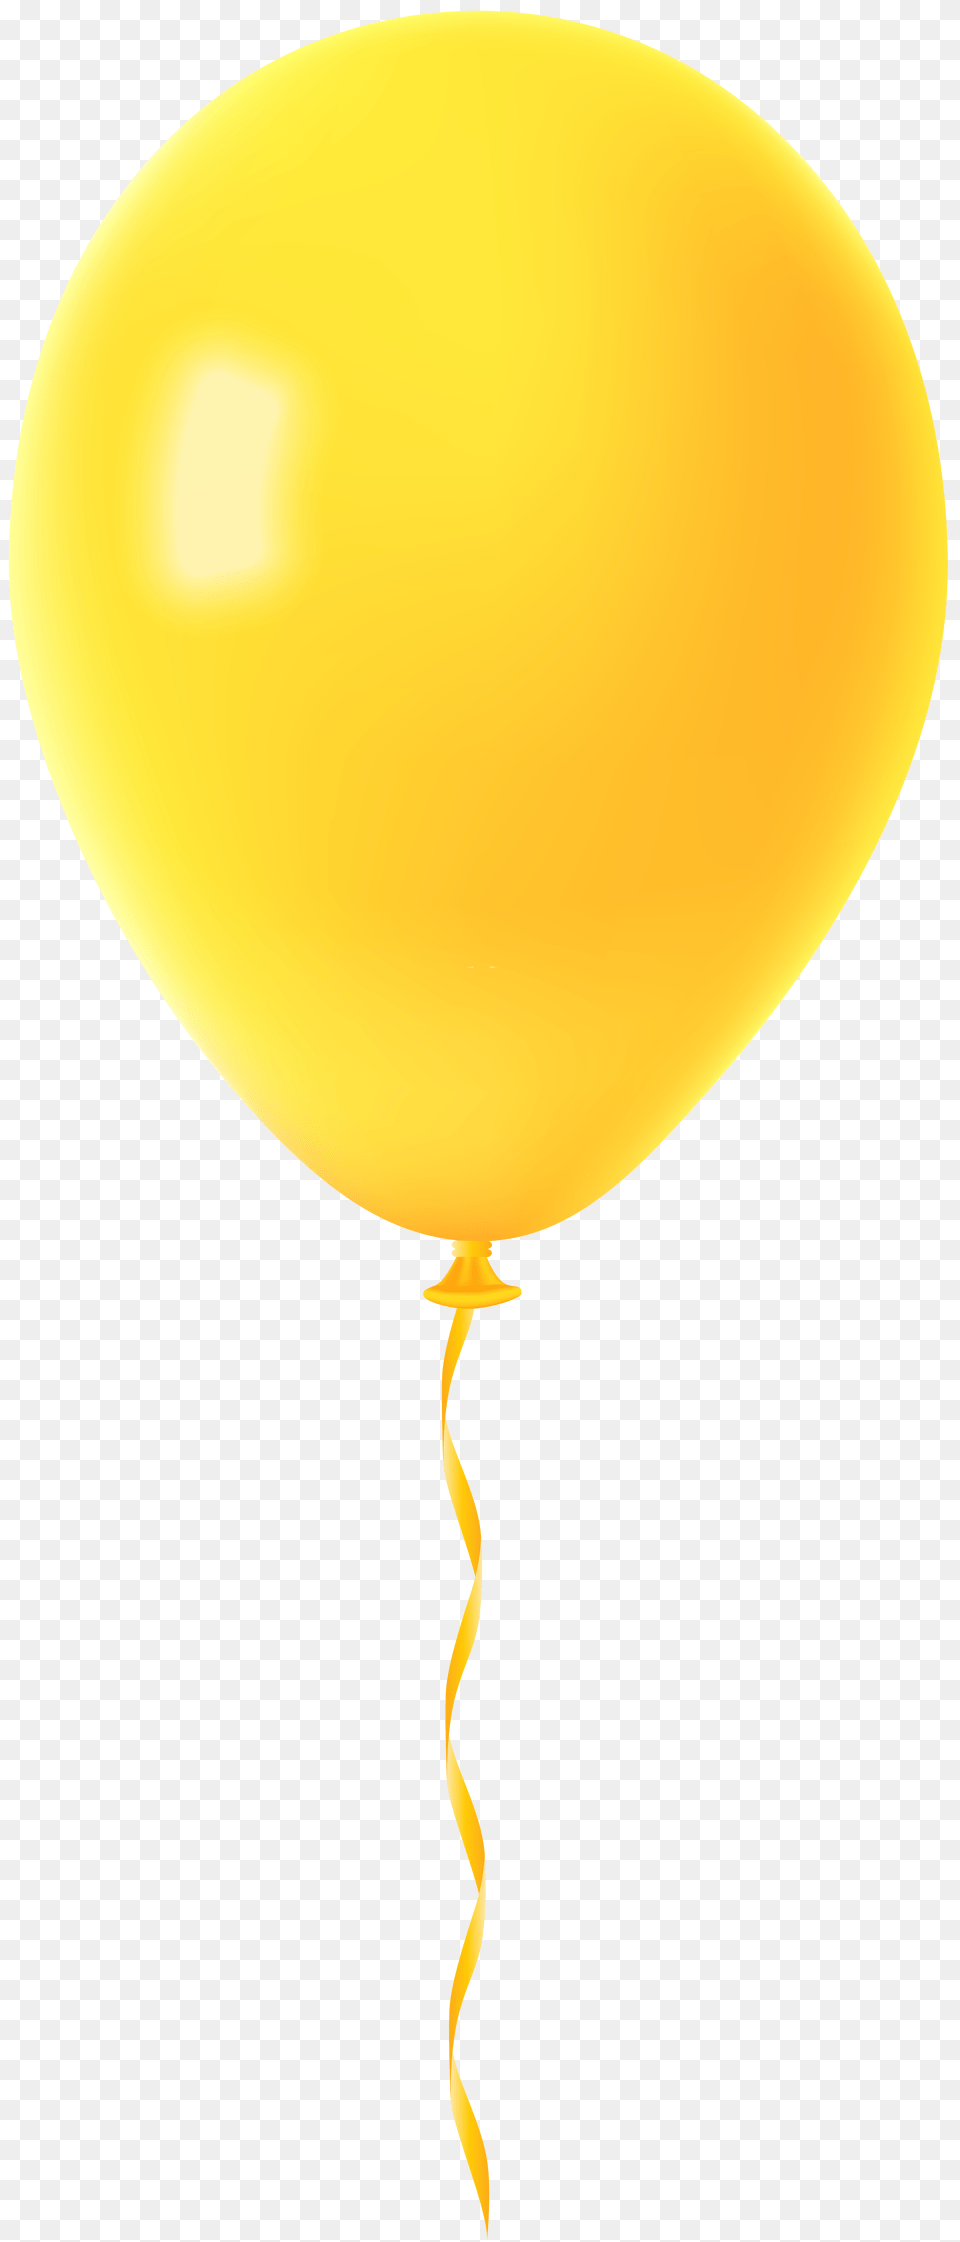 Clipart Black And White Balloon Transparent Clip Yellow Balloon Clipart Png Image